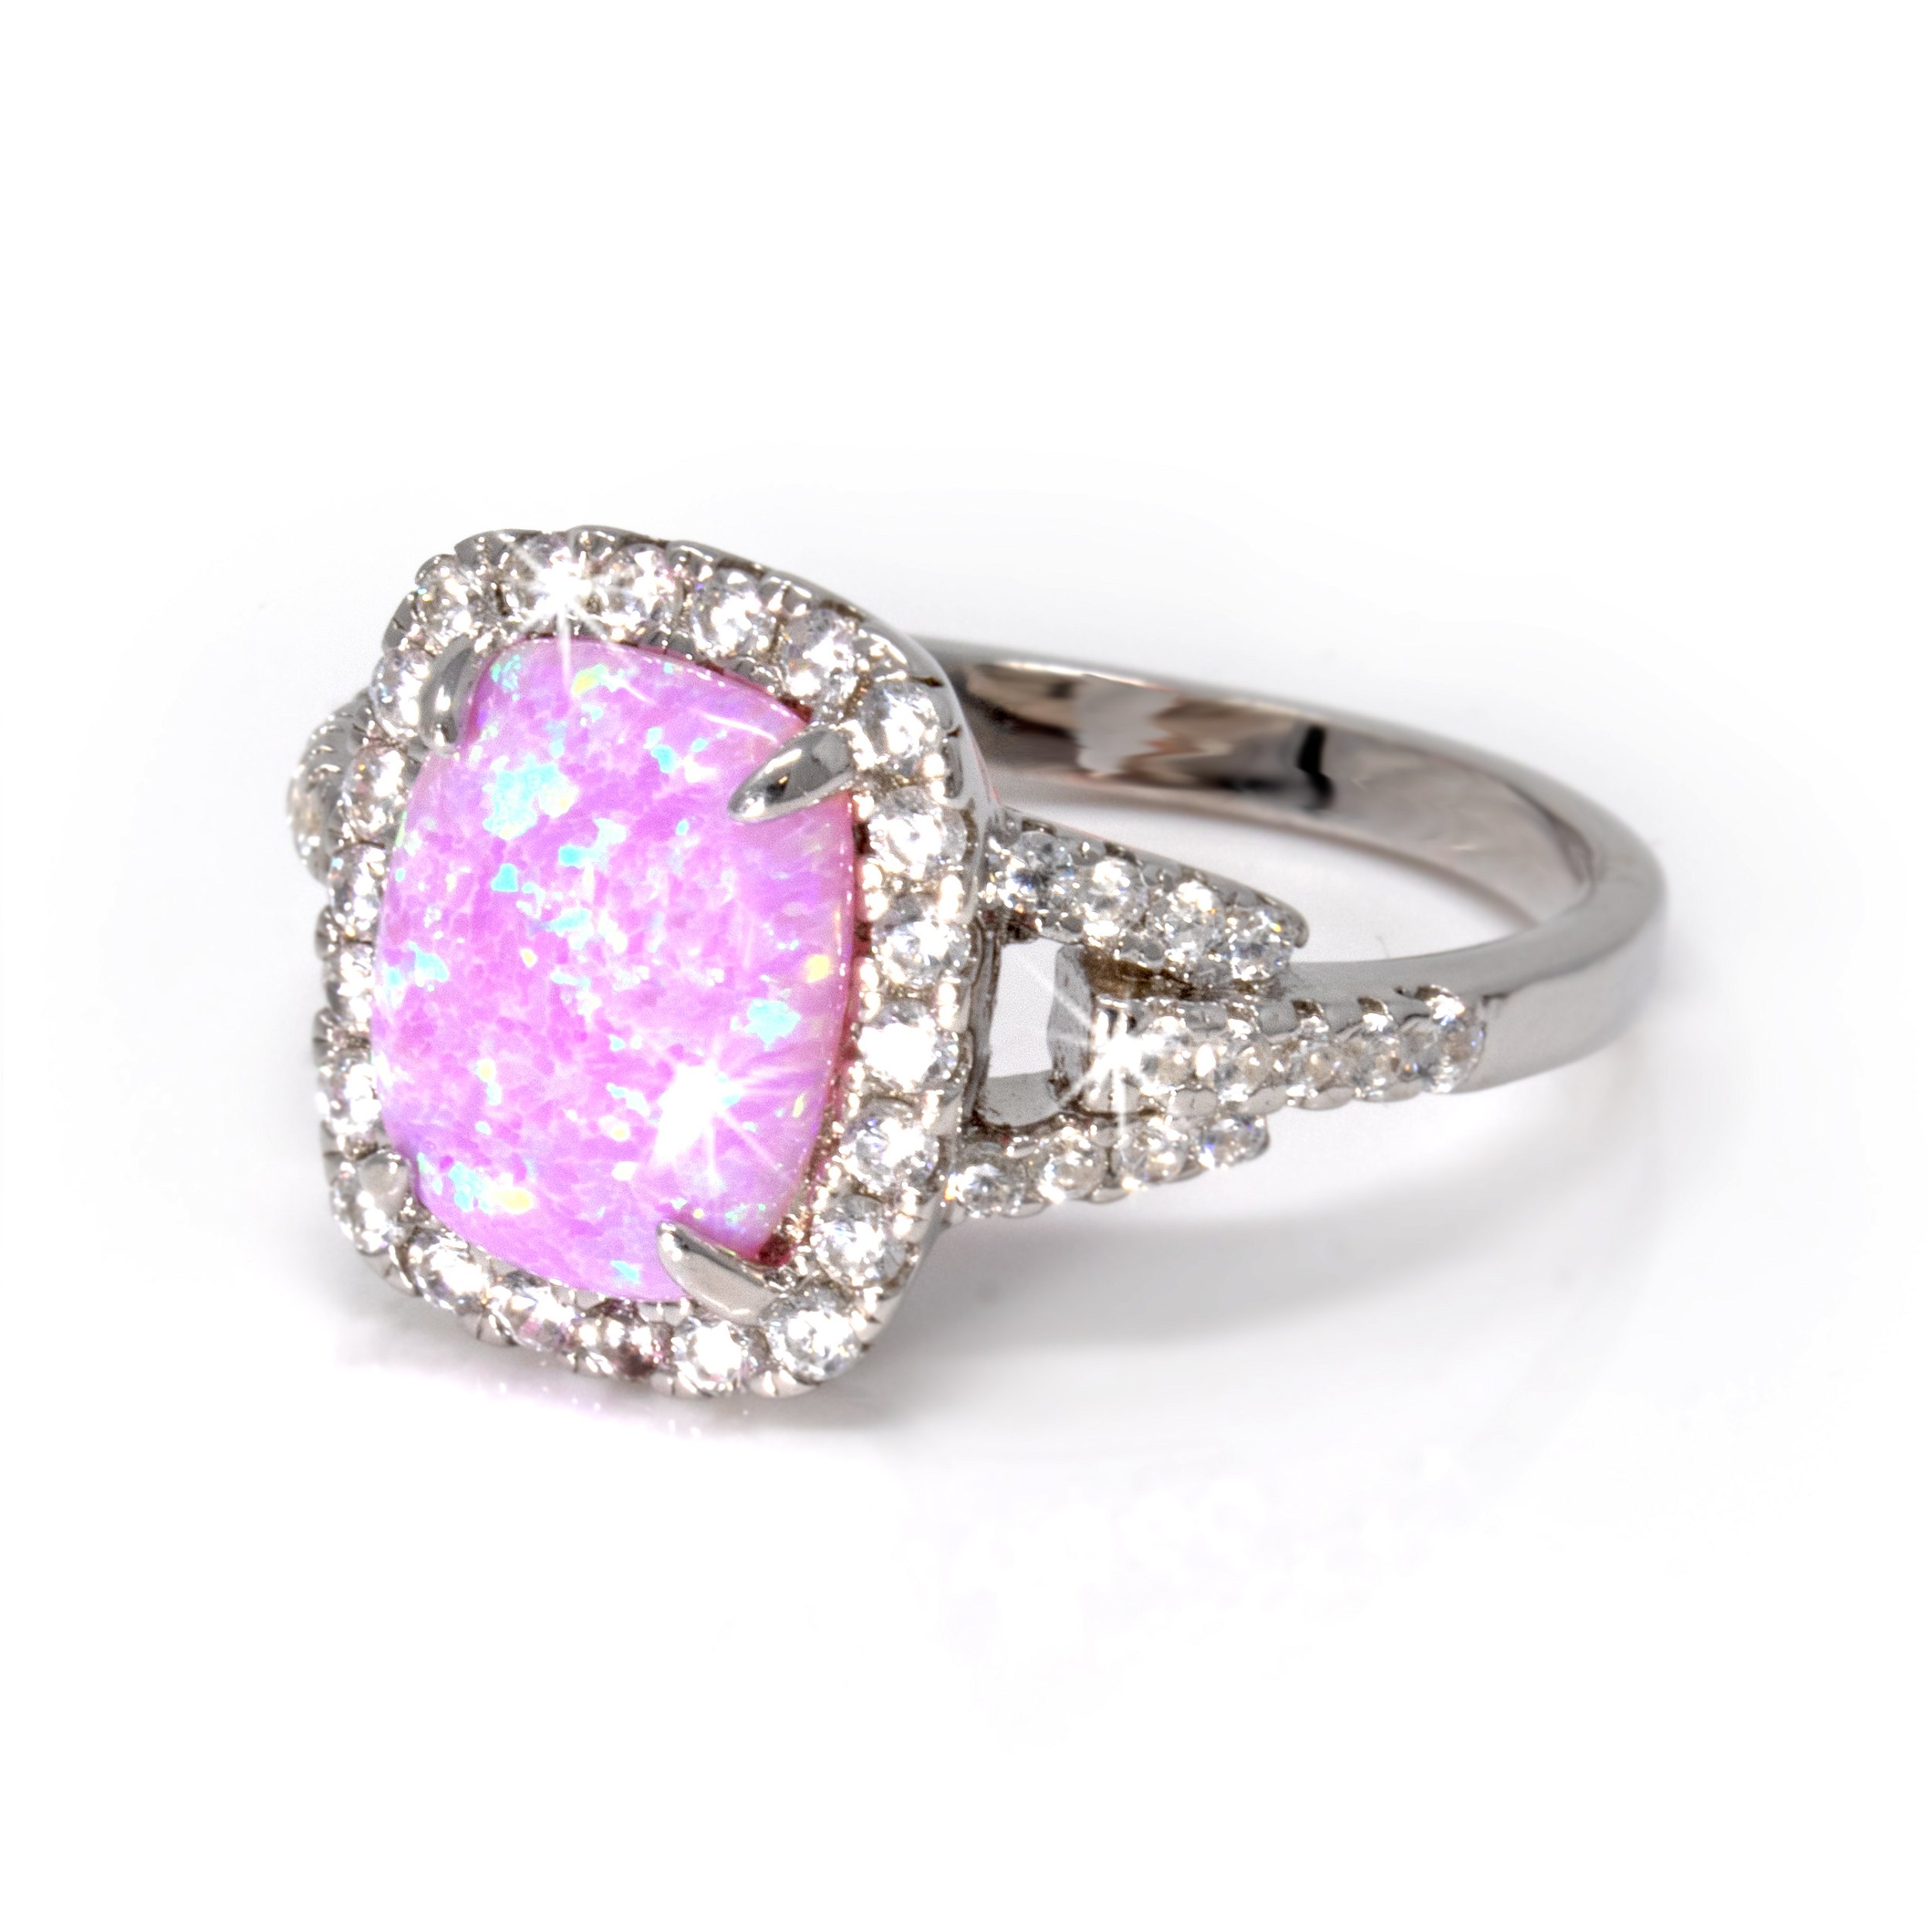 Pink Opal Ring Size 6 - Rounded Square Cabochon With Bezel Set White Czs - Prong Set